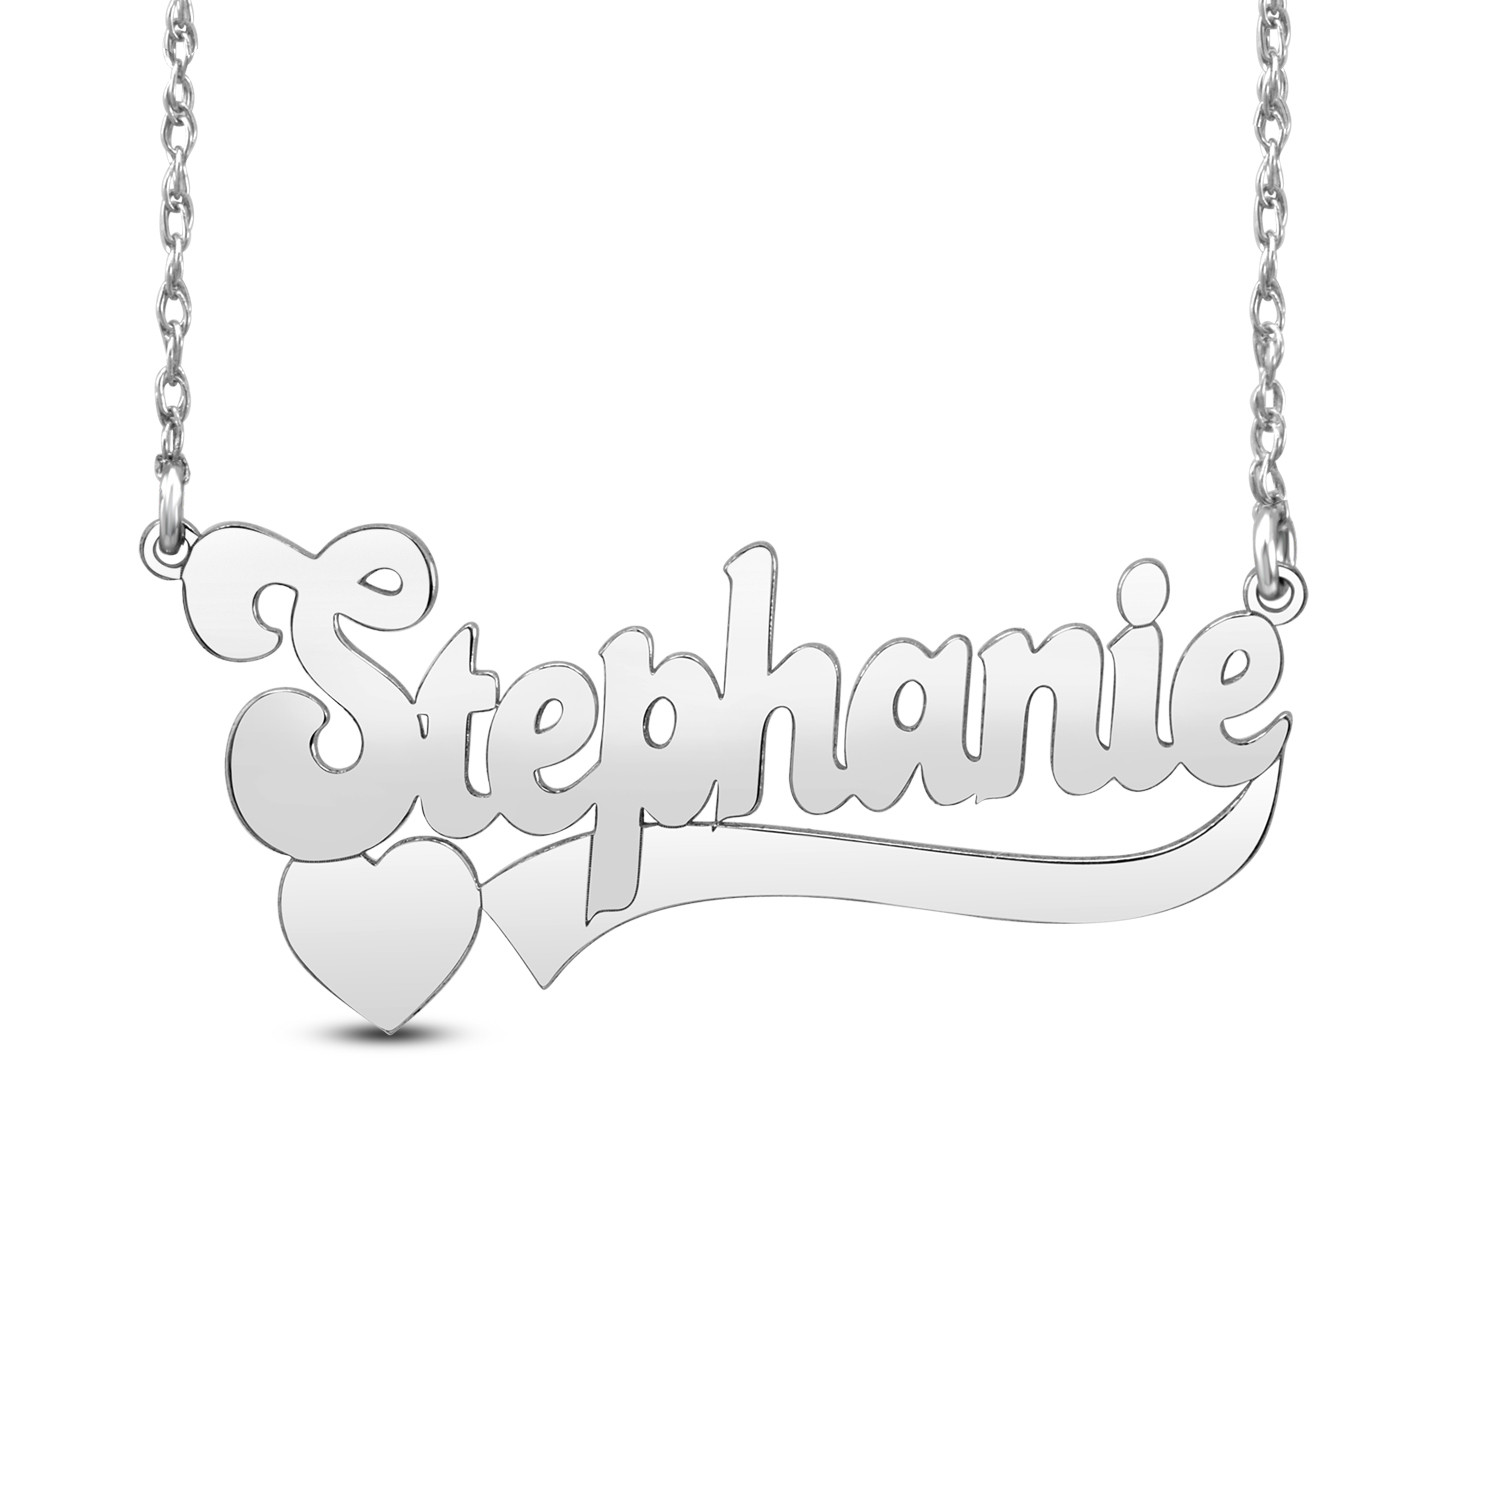 HI Polish Name Pers Necklace - 9 letter max 1 Uppercase letter (Example: Stephanie S=12.11mm x 1.5" e=6.14mm)